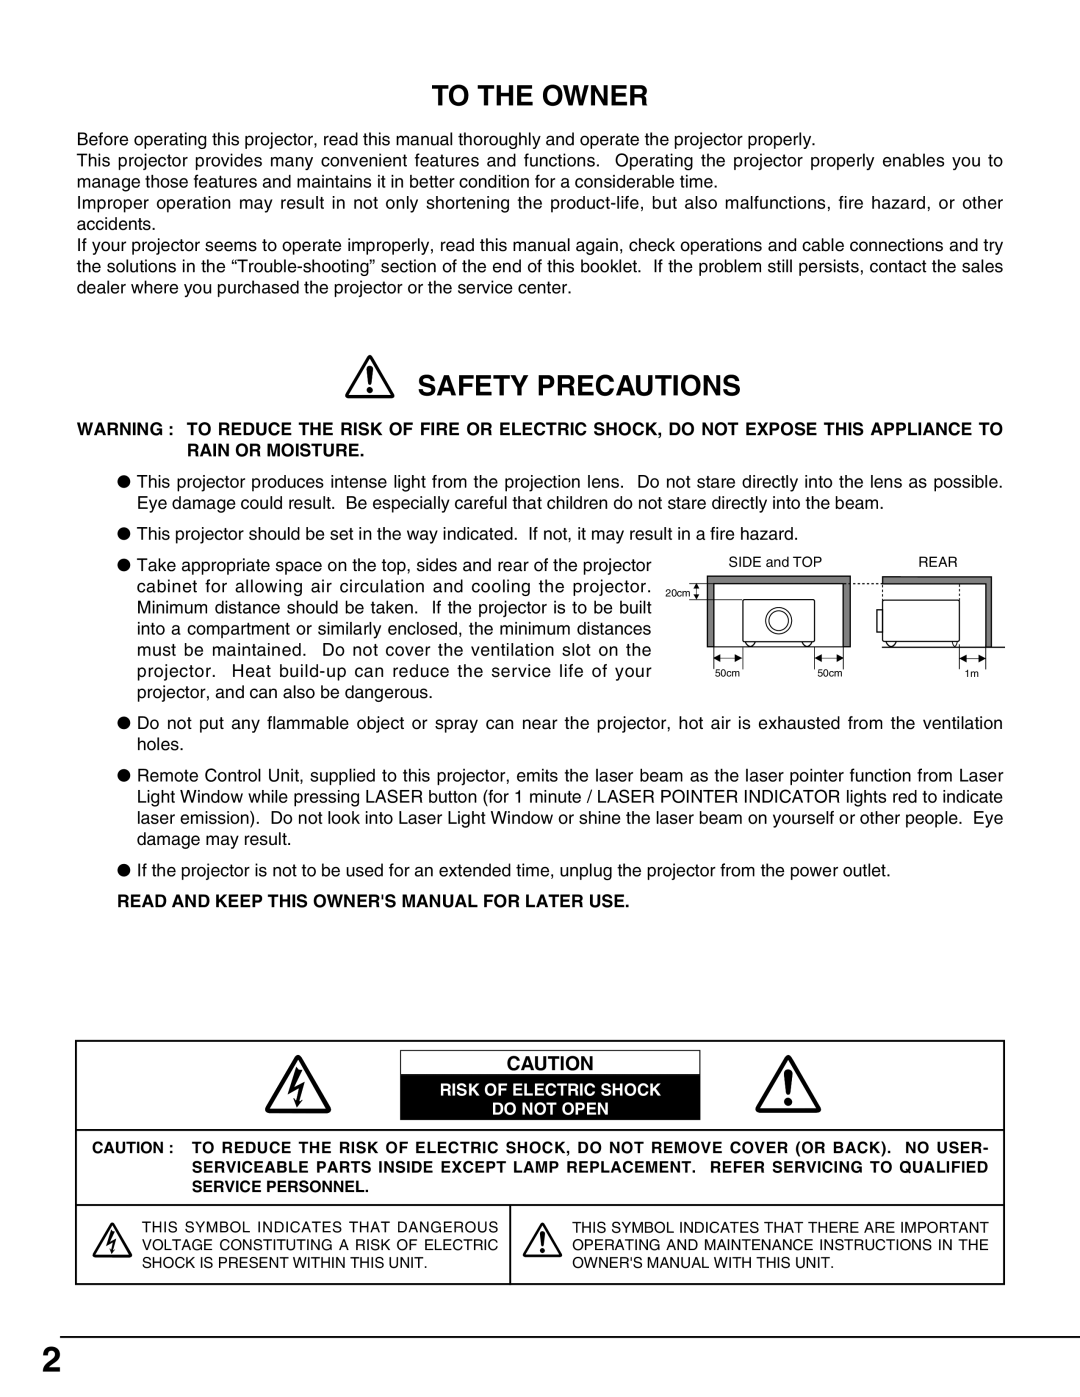 Eiki LC-UXT3 instruction manual To The Owner, Safety Precautions, Read And Keep This Owners Manual For Later Use 